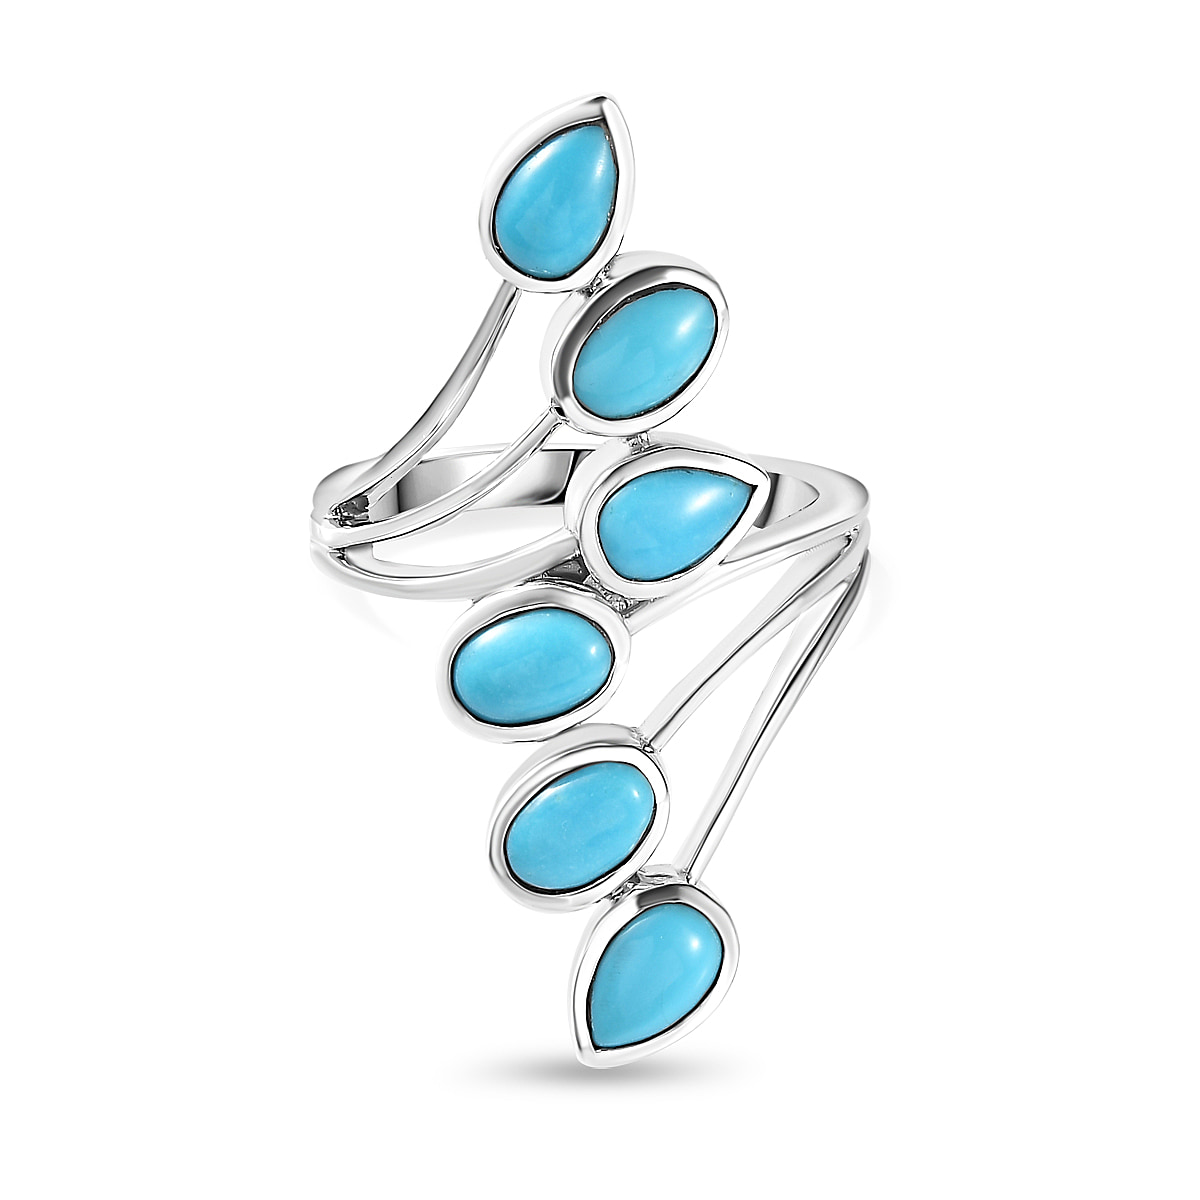 Arizona Sleeping Beauty Turquoise Bypass Spray Ring in Platinum Overlay Sterling Silver 2.60 Ct, Silver Wt. 5.3 Gms